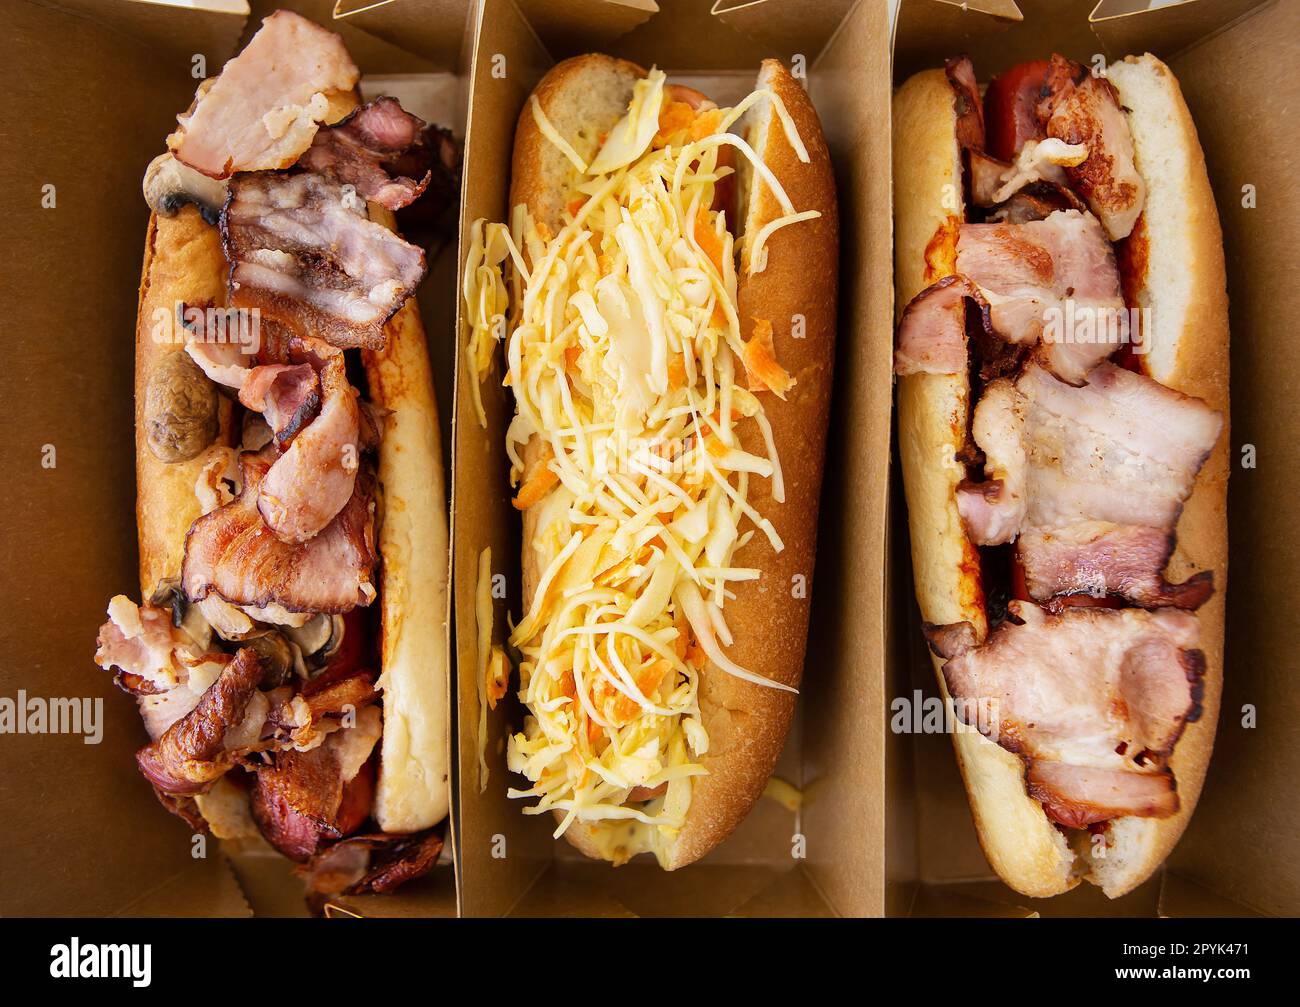 American hot dog with different flavors, with cheese and crispy onions on a white table in a minimalist style. Fast food, takeaway food, food for motorists. Hot dog sandwich with sausage. Stock Photo